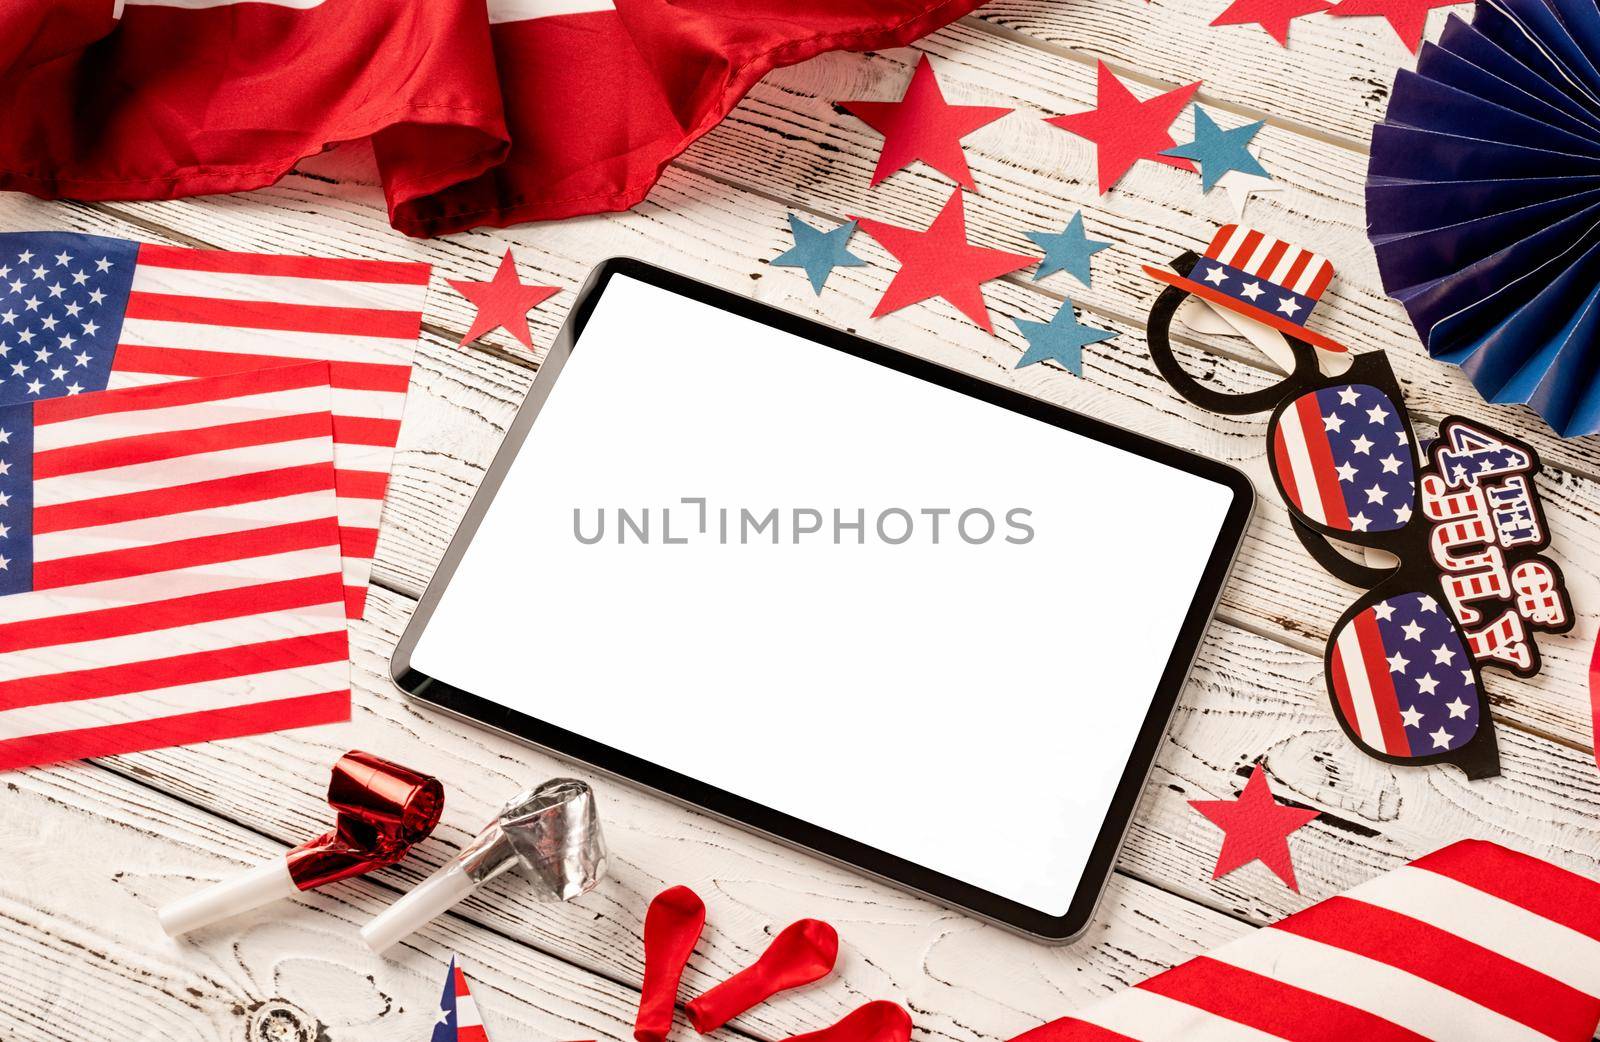 USA Memorial day, Presidents day, Veterans day, Labor day, or 4th of July celebration. Digital tablet with white screen for mockup design surrounded with independence day party element